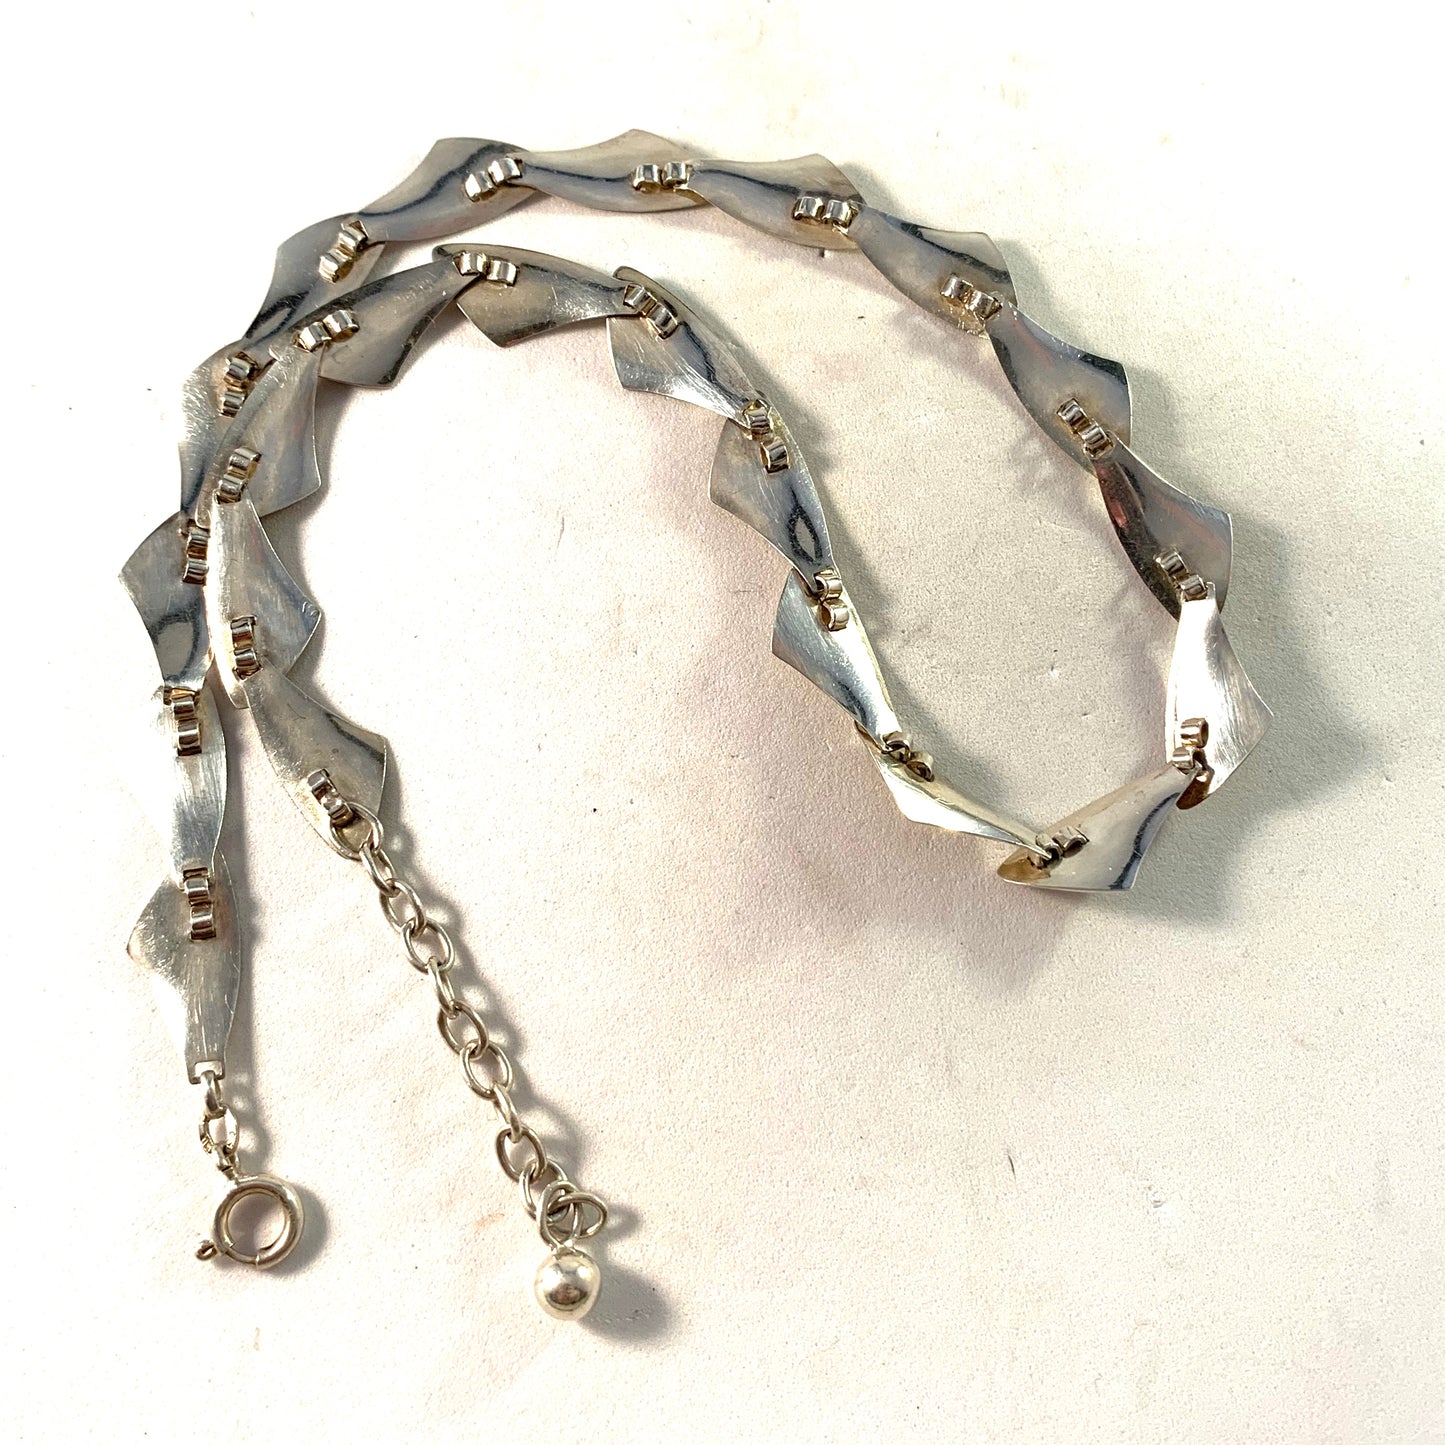 Andreas Daub, Germany c 1960 Mid Century Modern Solid 830 Silver Necklace.